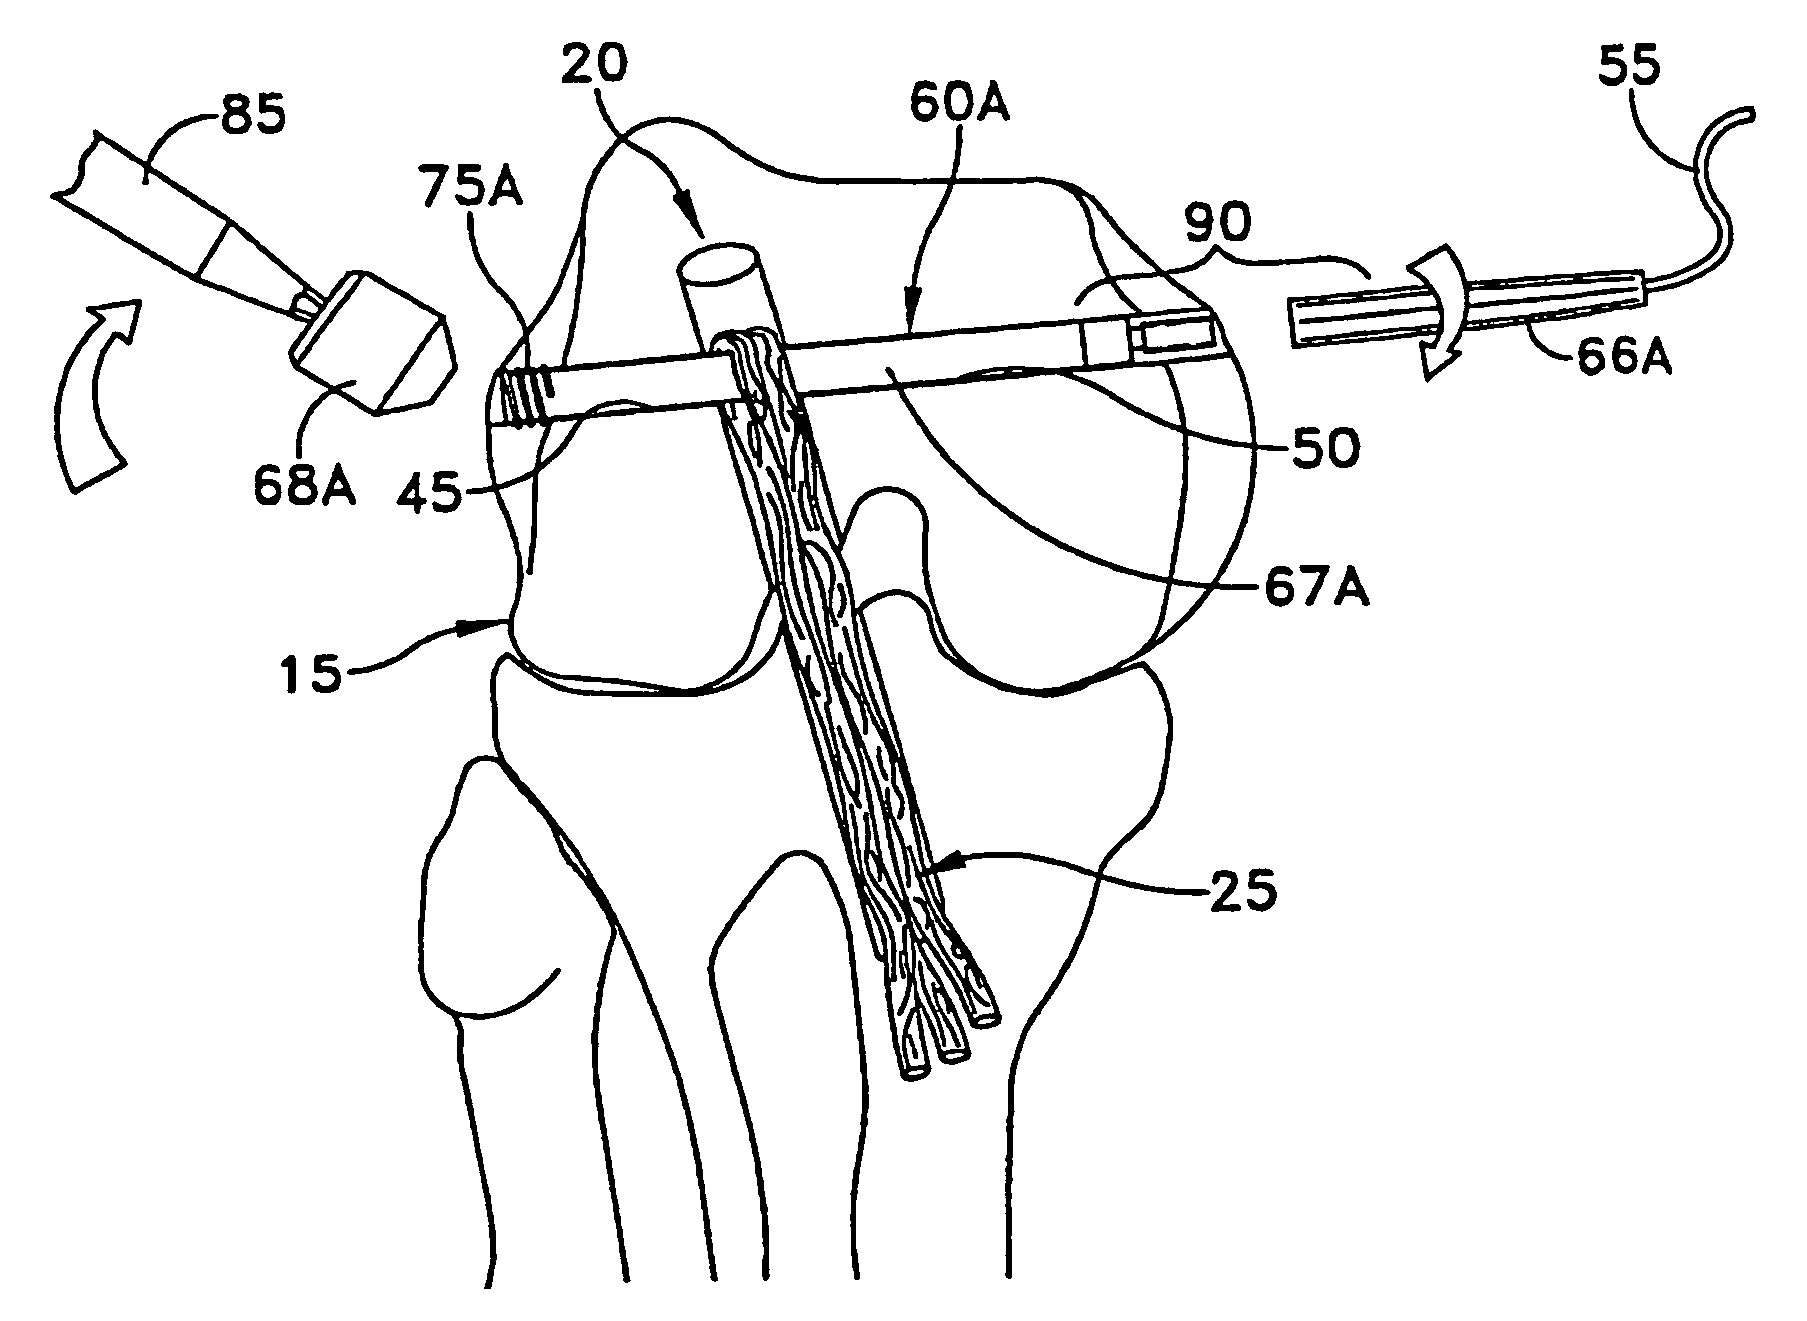 Apparatus and method for reconstructing a ligament